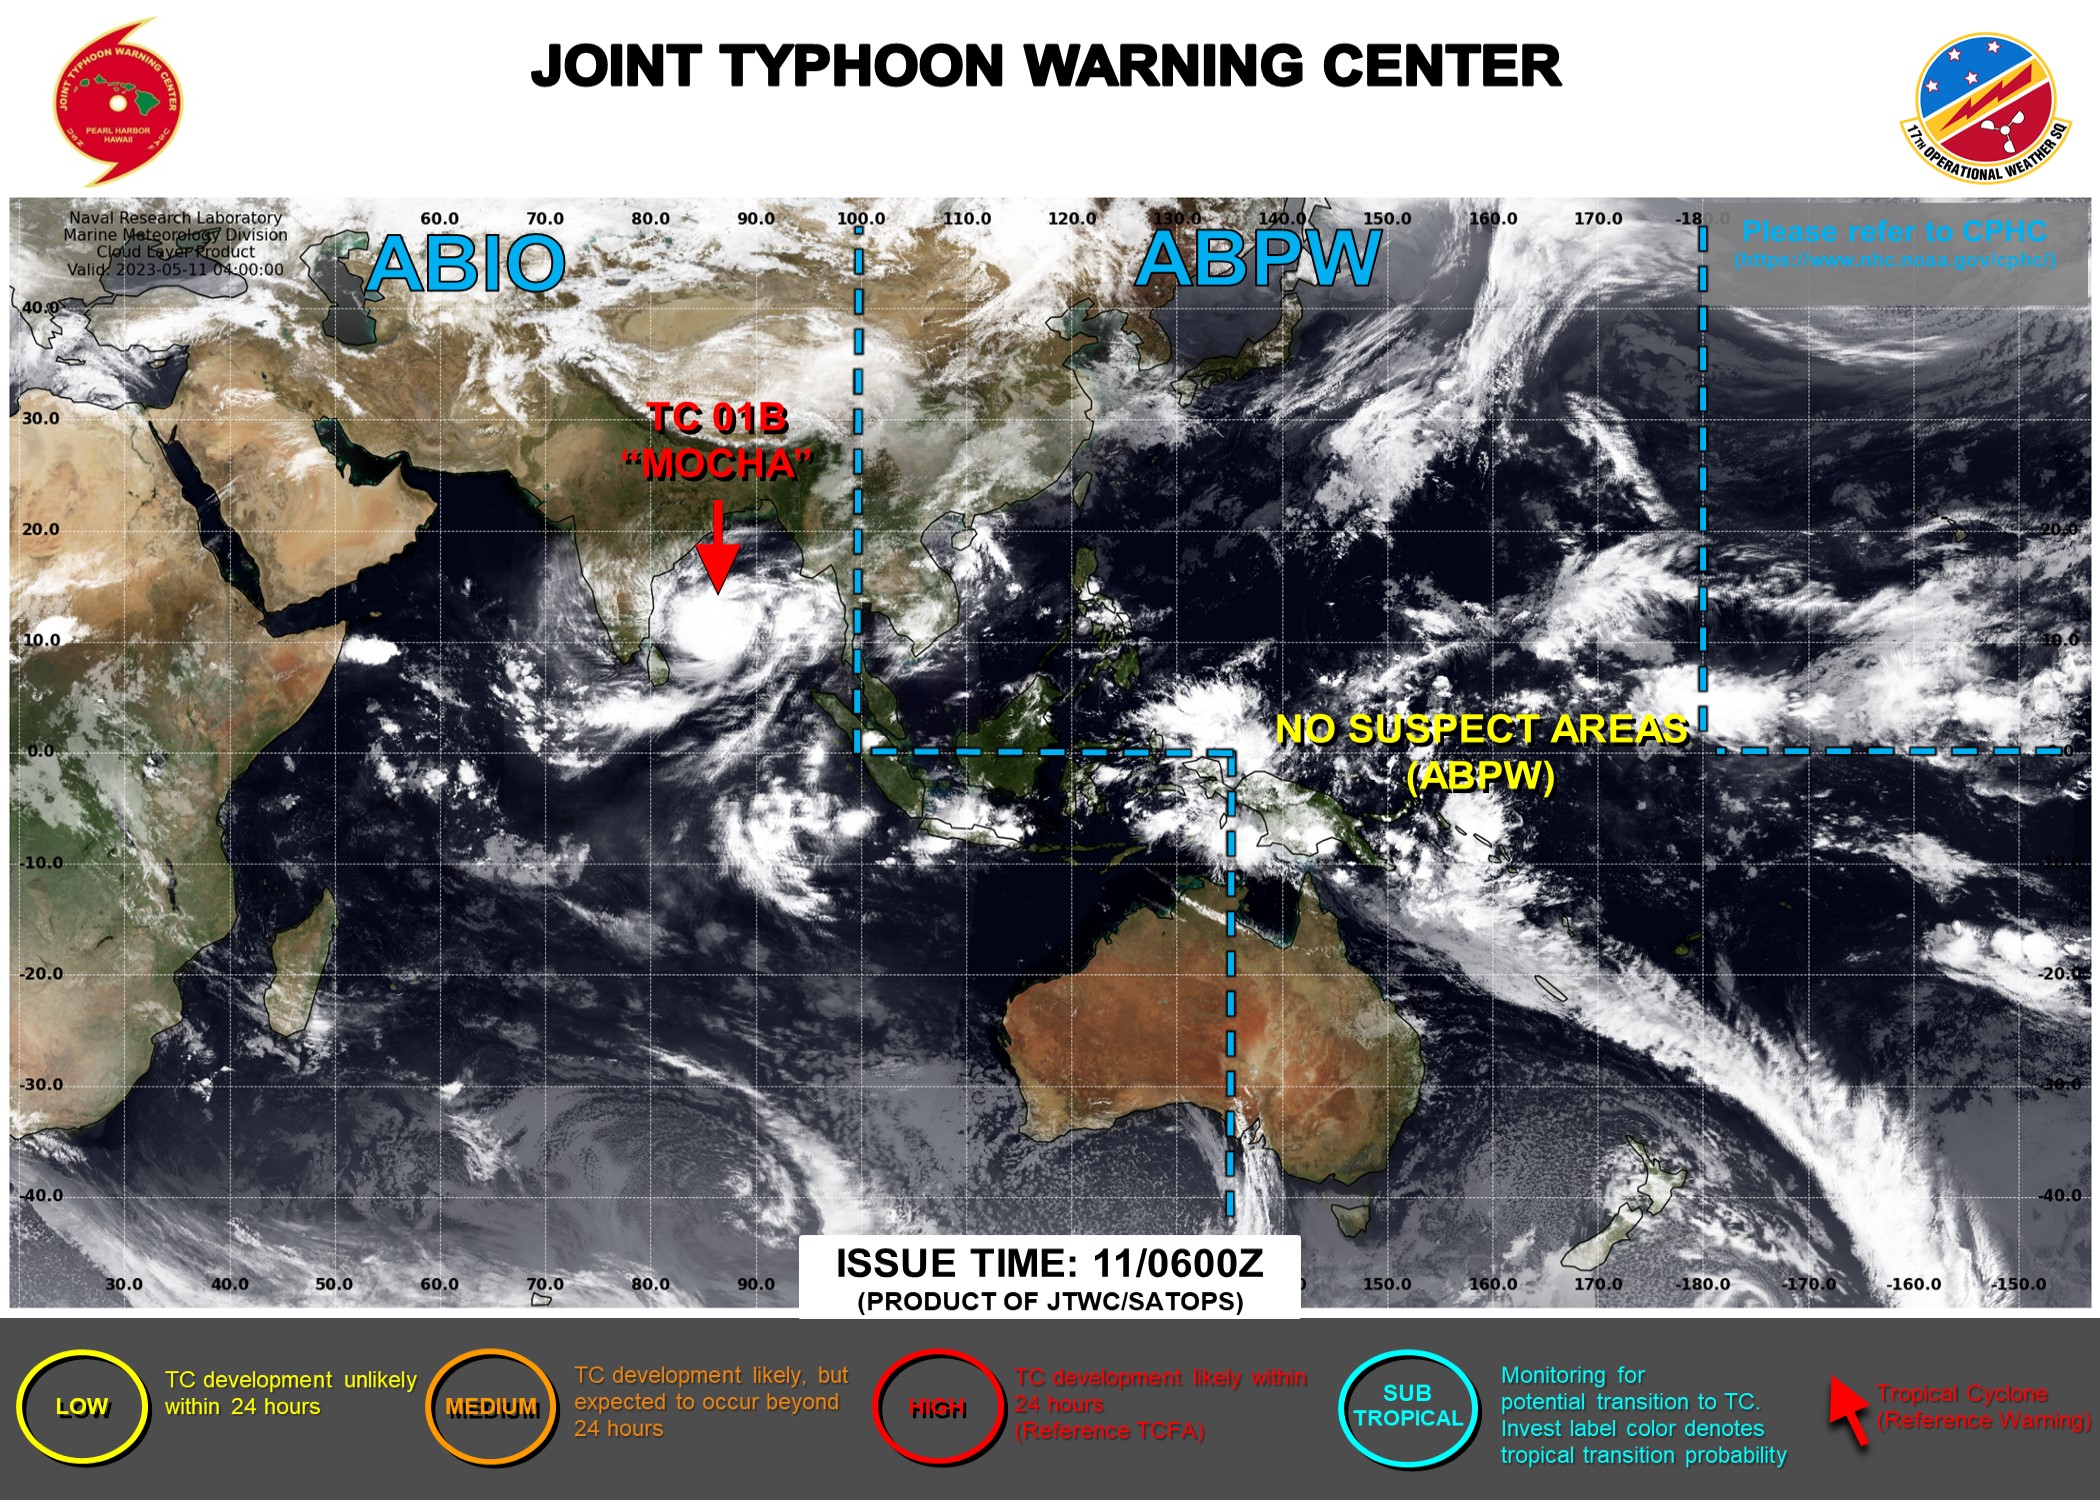 JTWC IS ISSUING 6HOURLY WARNINGS AND 3HOURLY SATELLITE BULLETINS ON TC 01B(MOCHA).